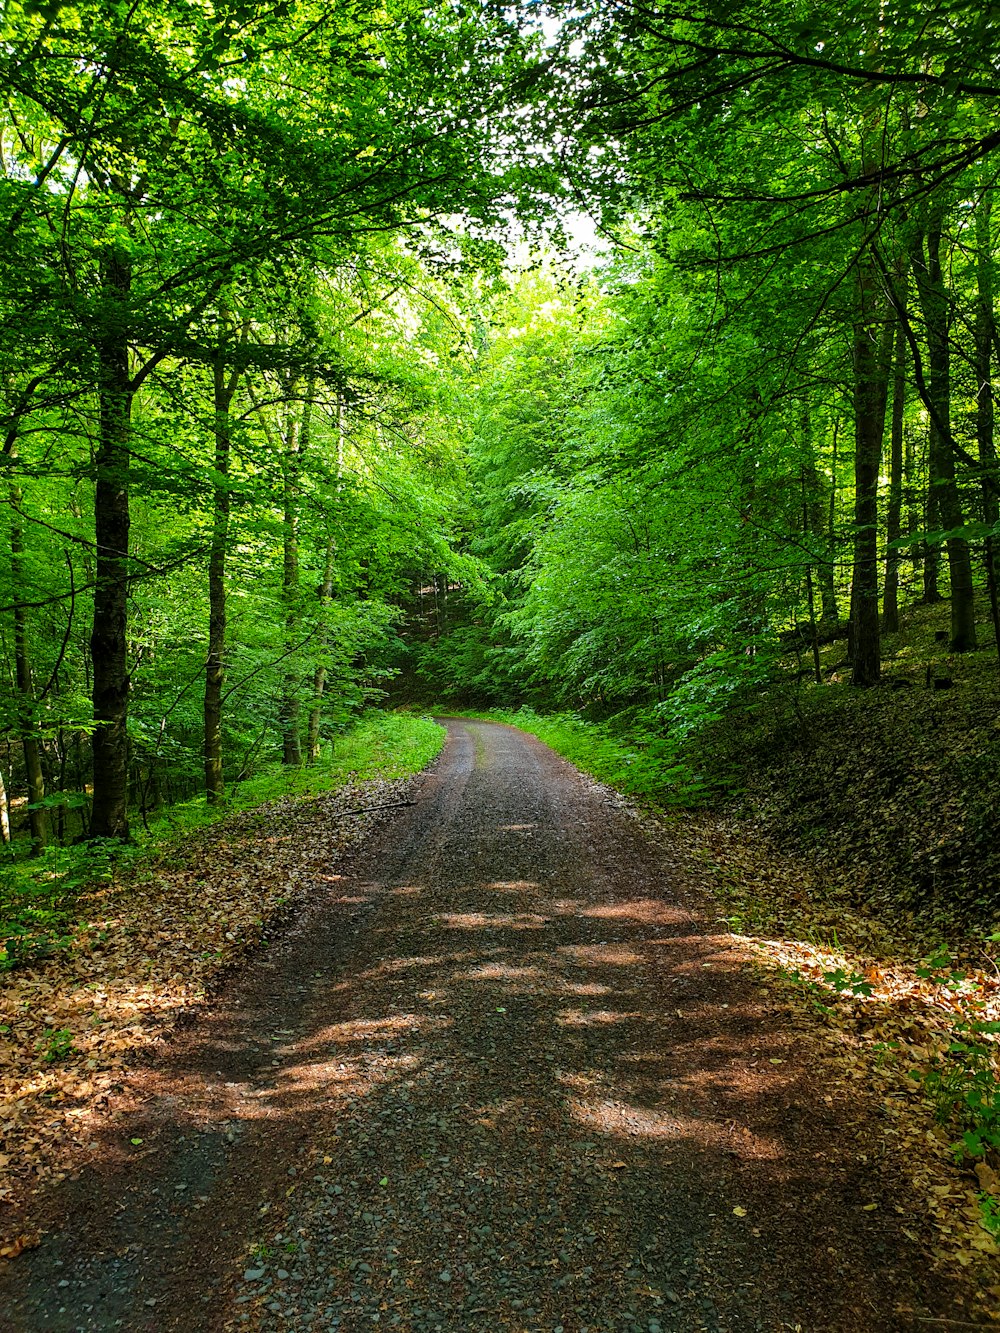 brown dirt road lined with trees